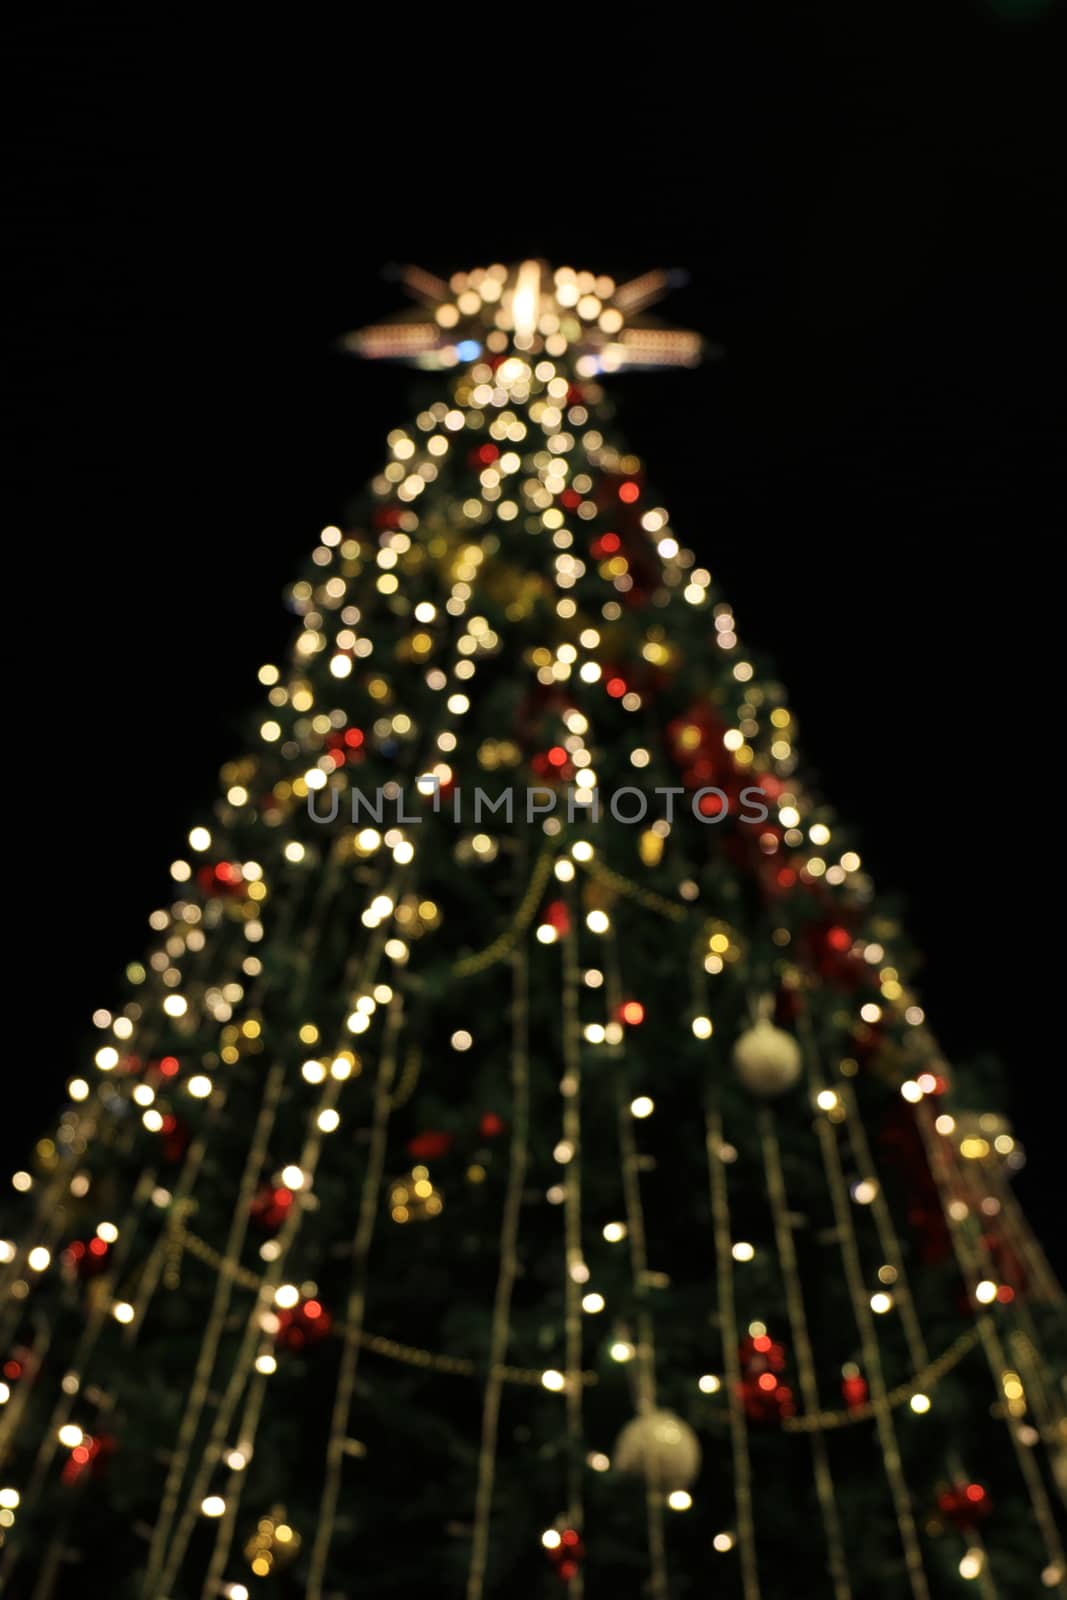 Blurred Christmas tree decoration background with night lights, Christmas holiday celebration, Christmas trees, a new European winter